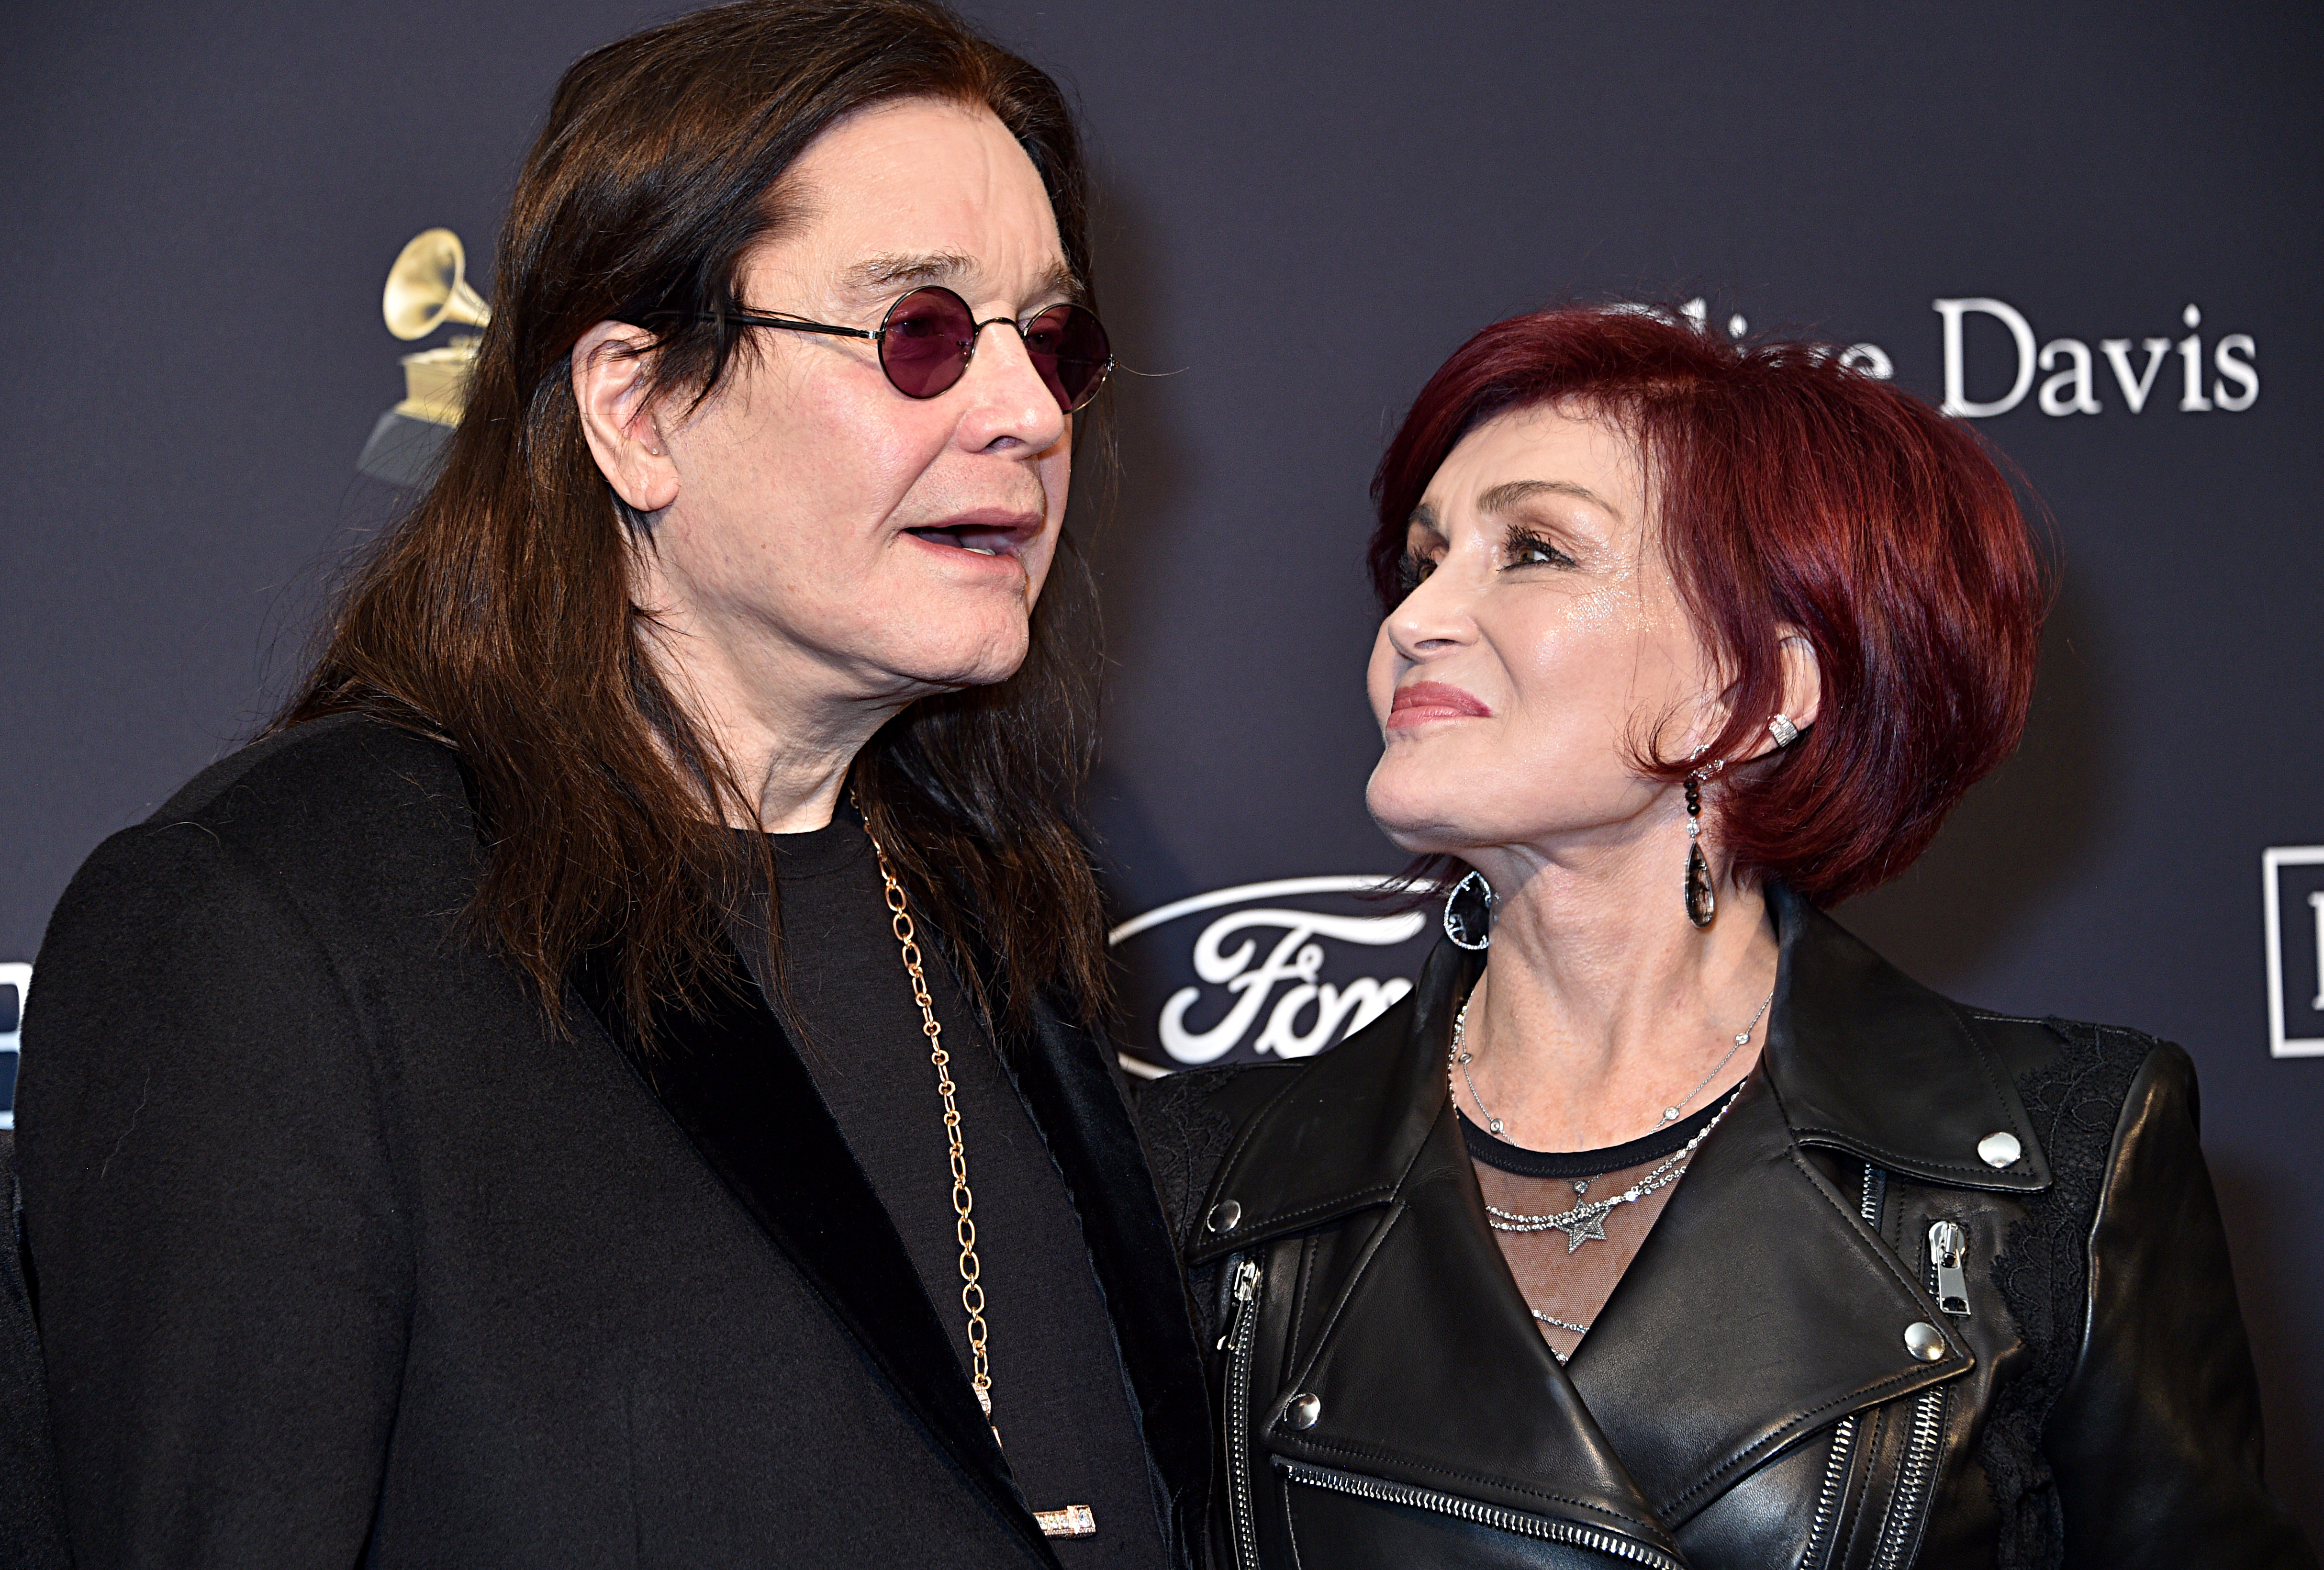 Ozzy and Sharon Osbourne at the Pre-Grammy Gala and Grammy Salute to Industry Icons Honoring Sean "Diddy" Combs on January 25, 2020, in Beverly Hills, California | Source: Getty Images